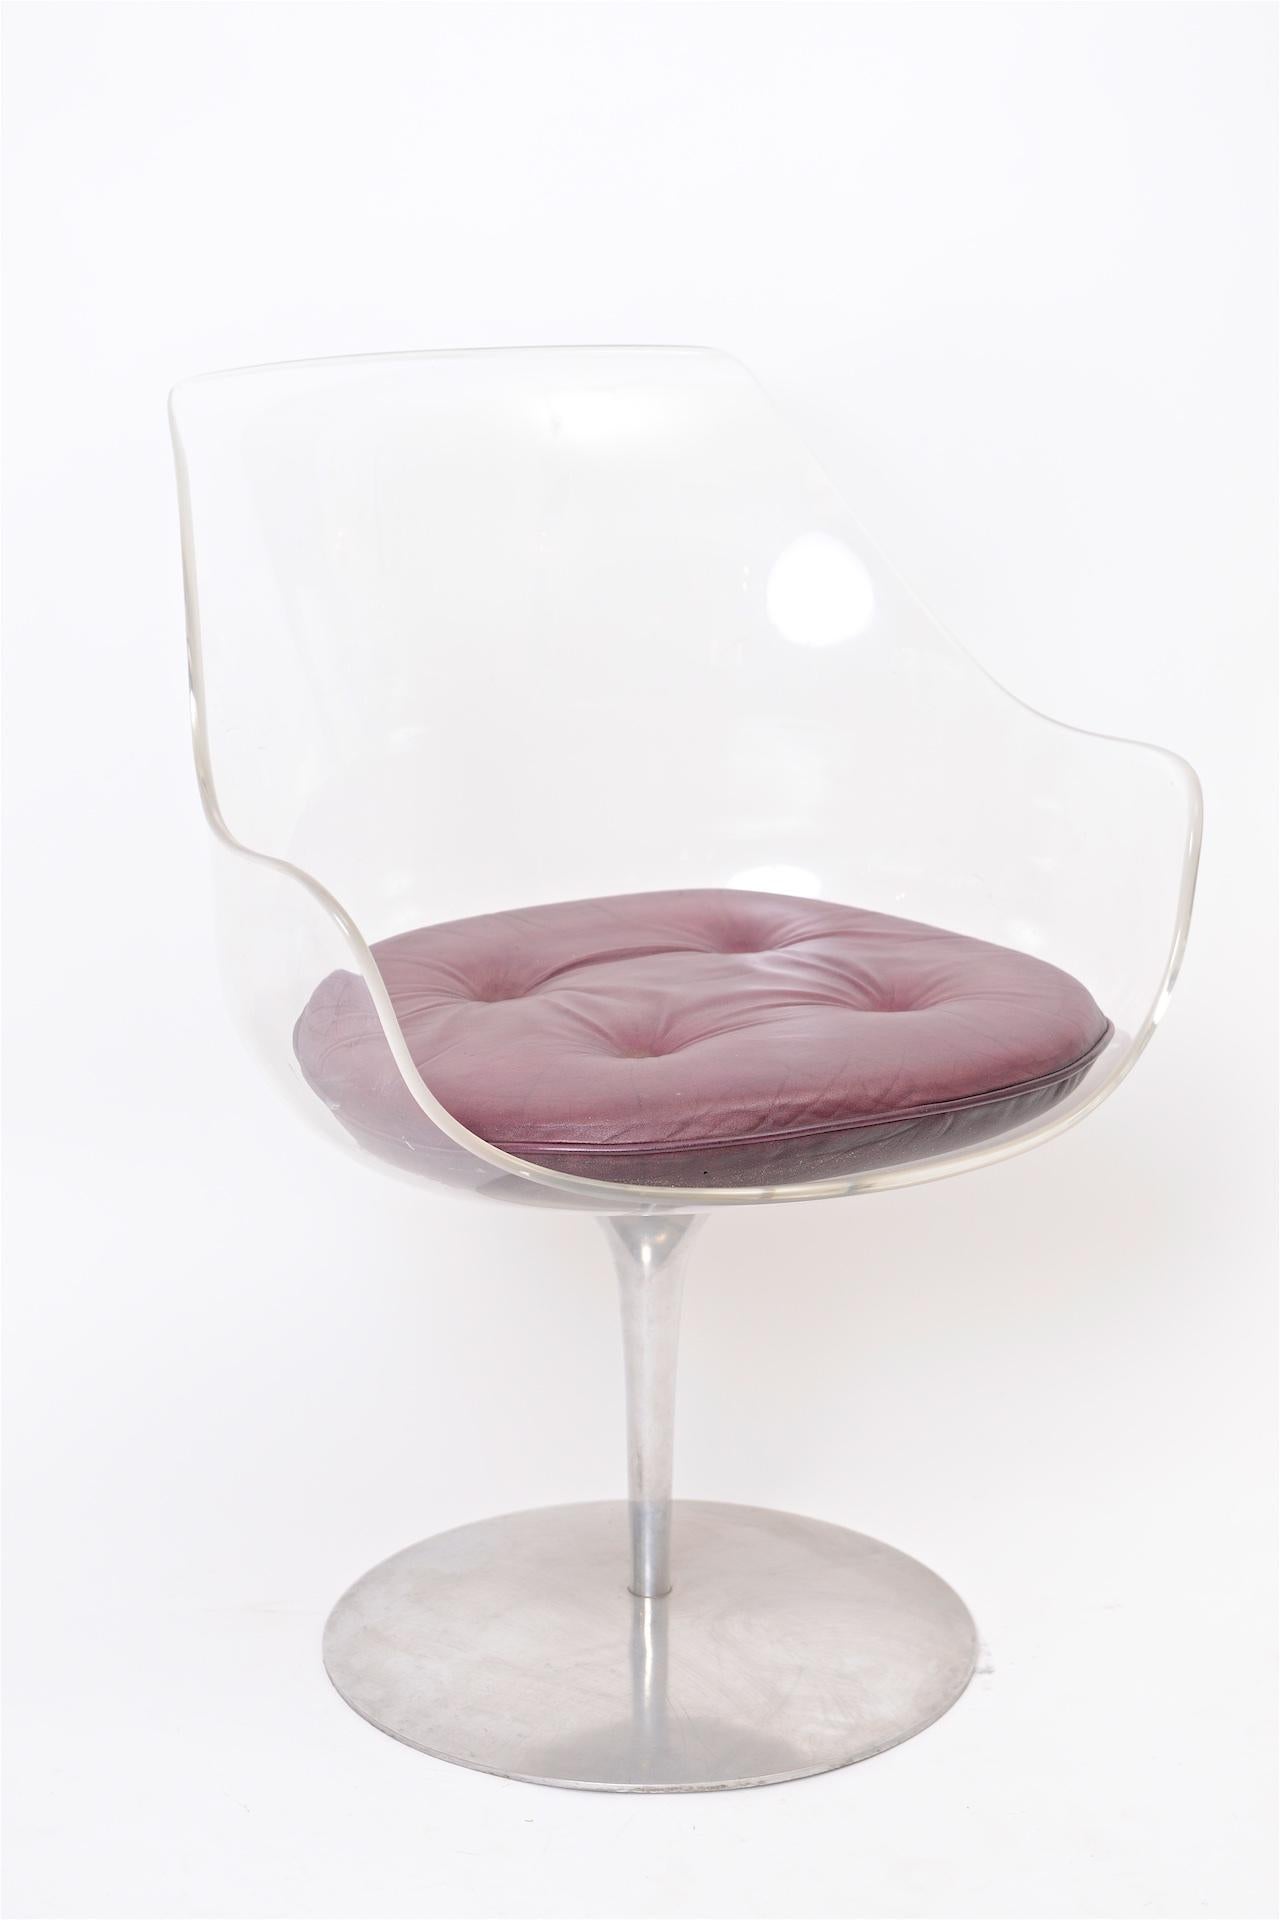 Moulded Lucite with leather cushion on sprung auto return revolving aluminium base.

Lucite is in excellent condition.

    